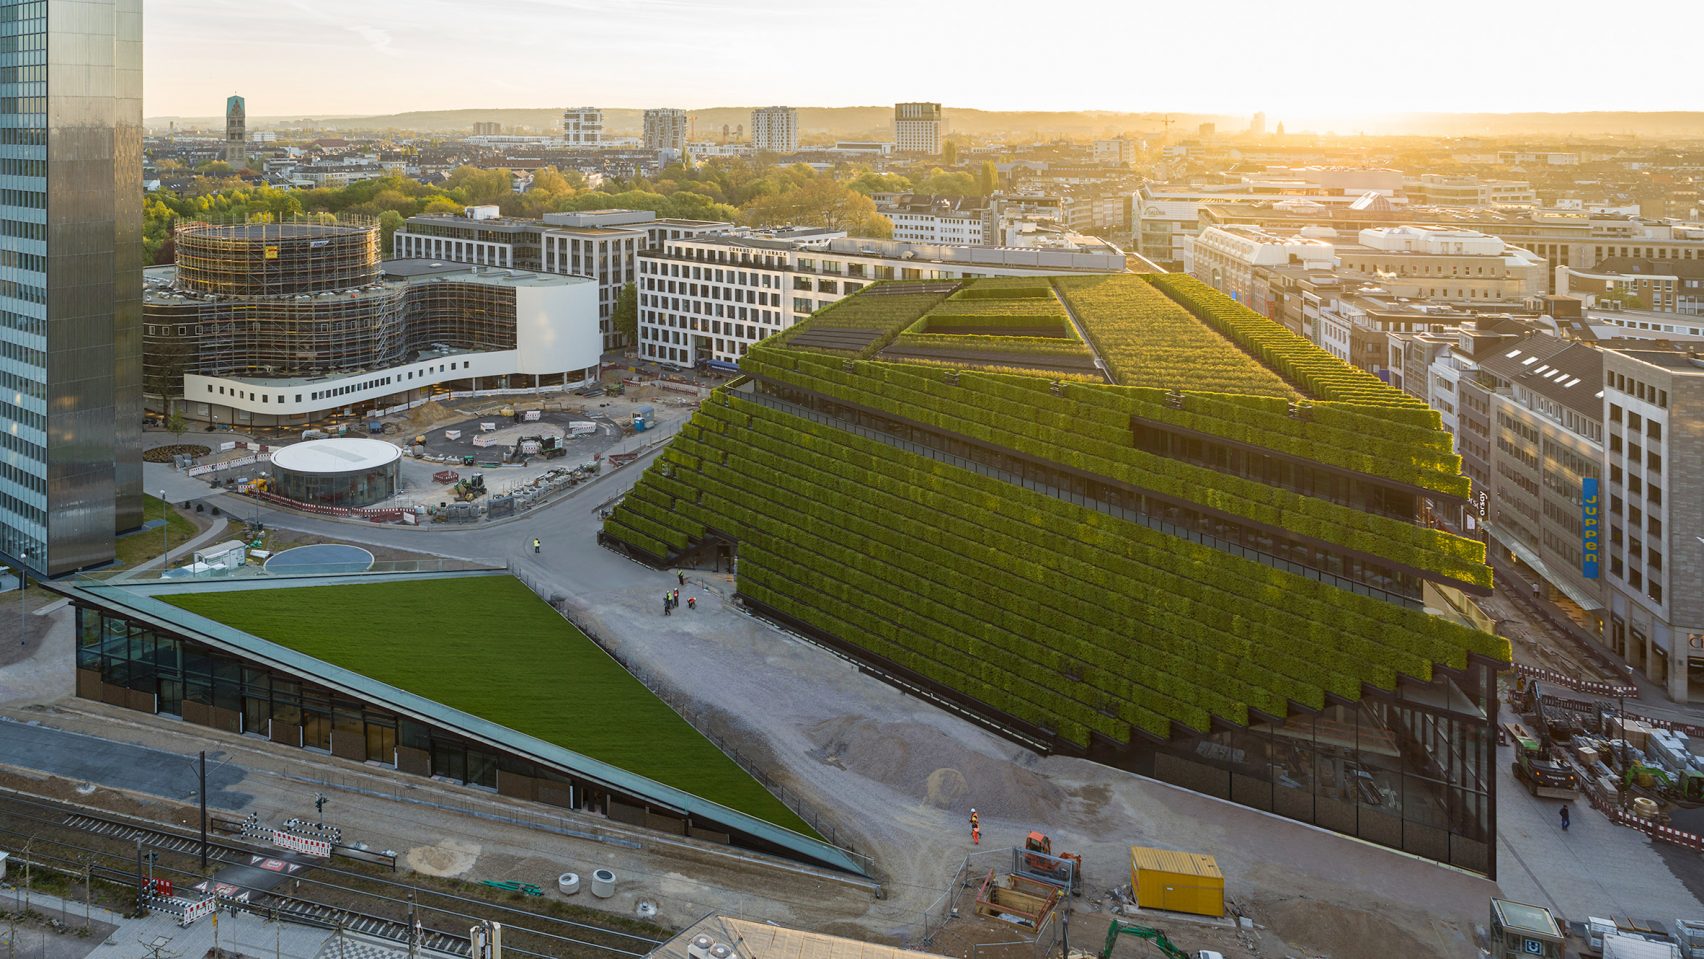 Europe’s largest green facade has been completed